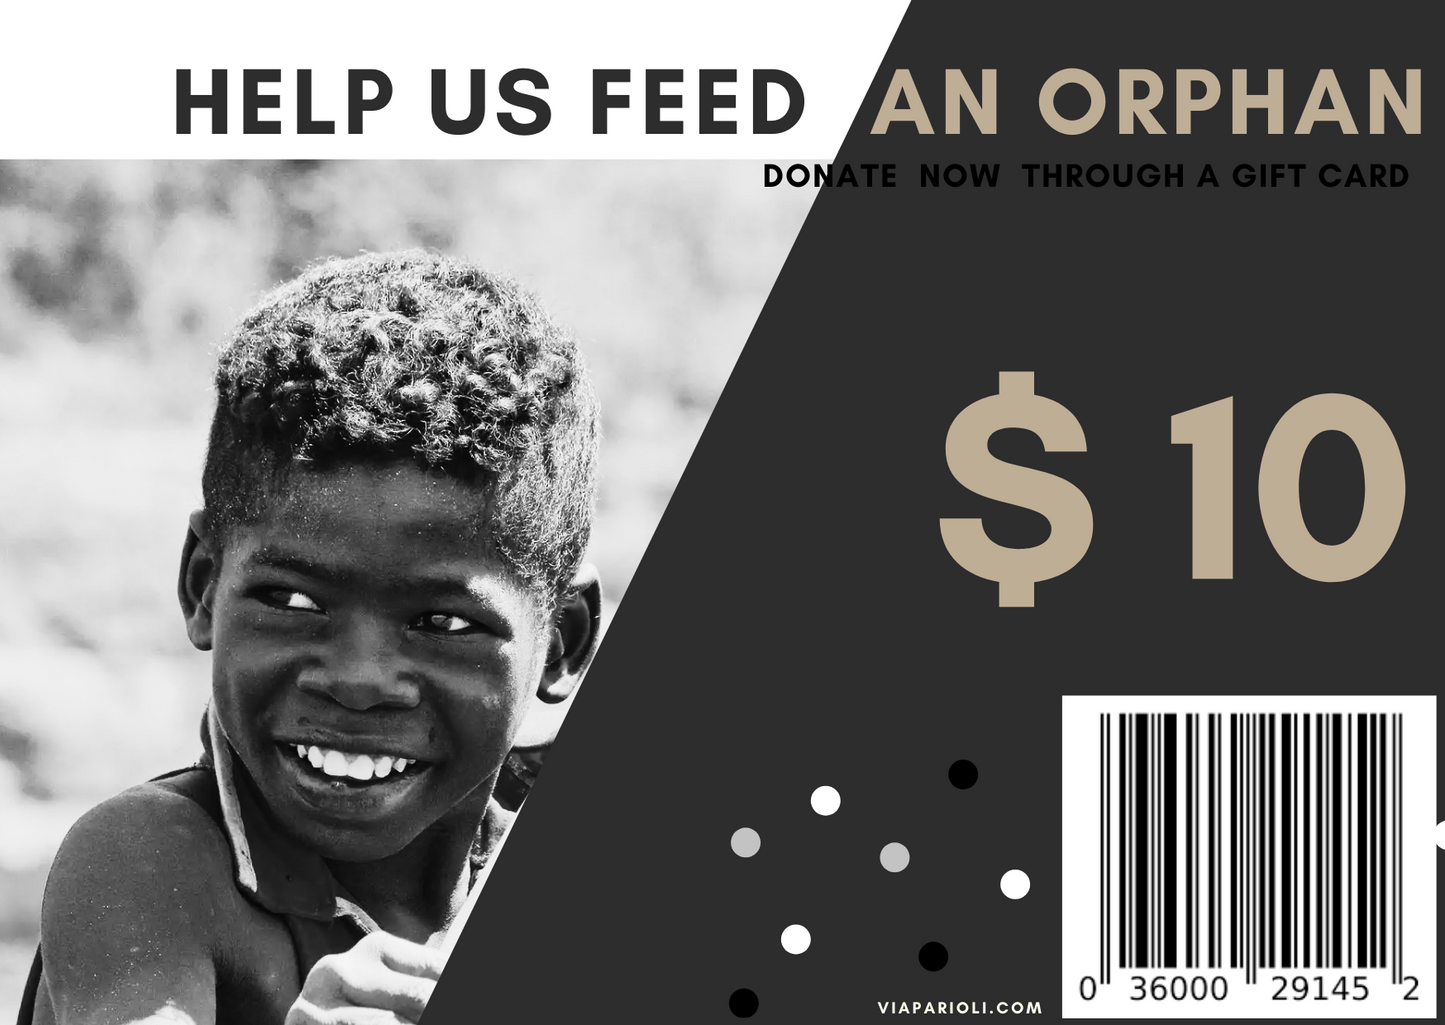 VIA PARIOLI  PARIOLI GIFTS - BUY A GIFT CARD AND FEED A CHILD IN MADAGASCAR.